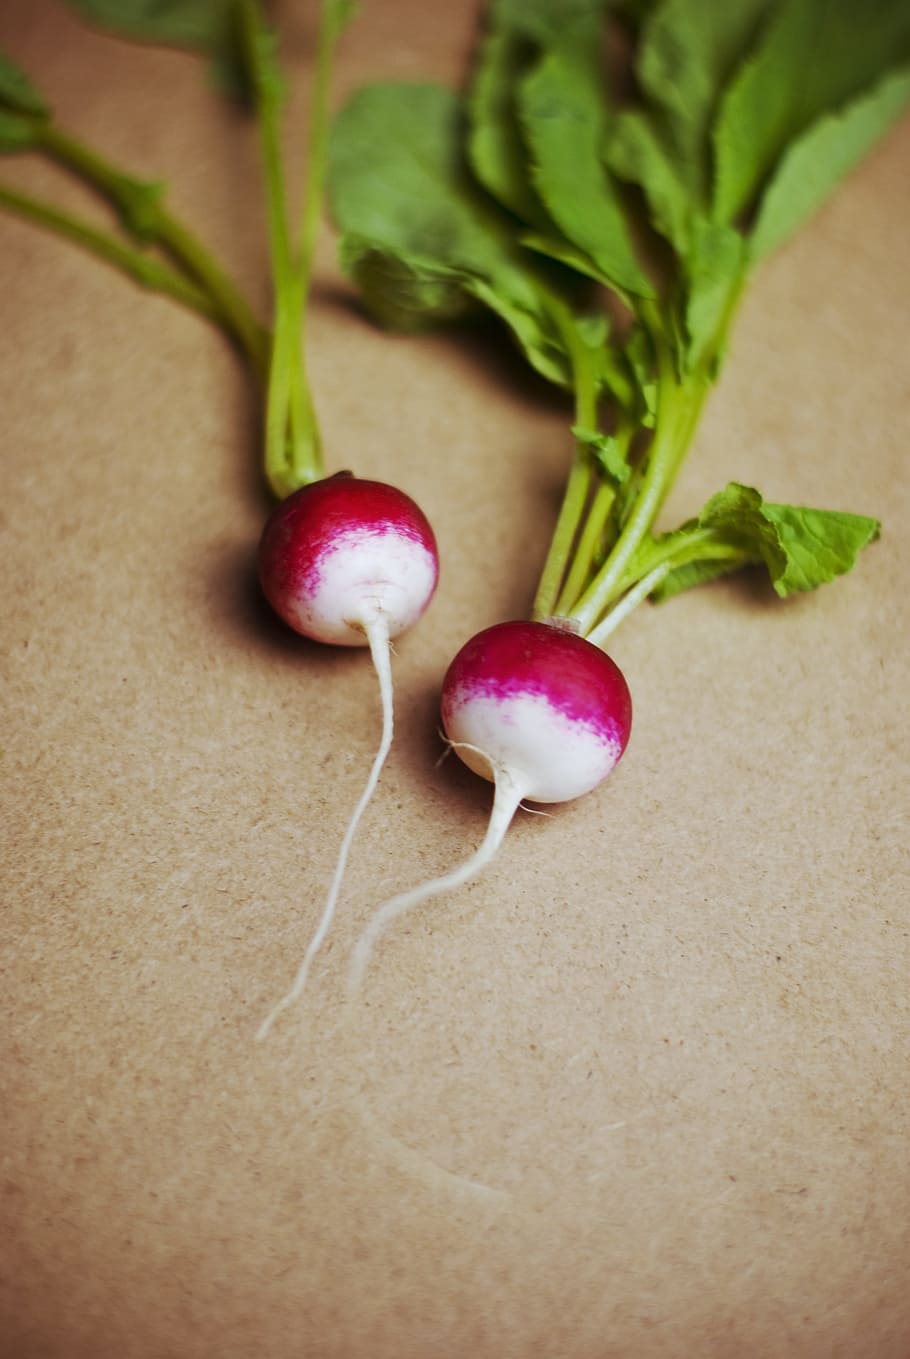 radish, vegetables, healthy, food, food and drink, freshness, close-up, healthy eating, vegetable, indoors